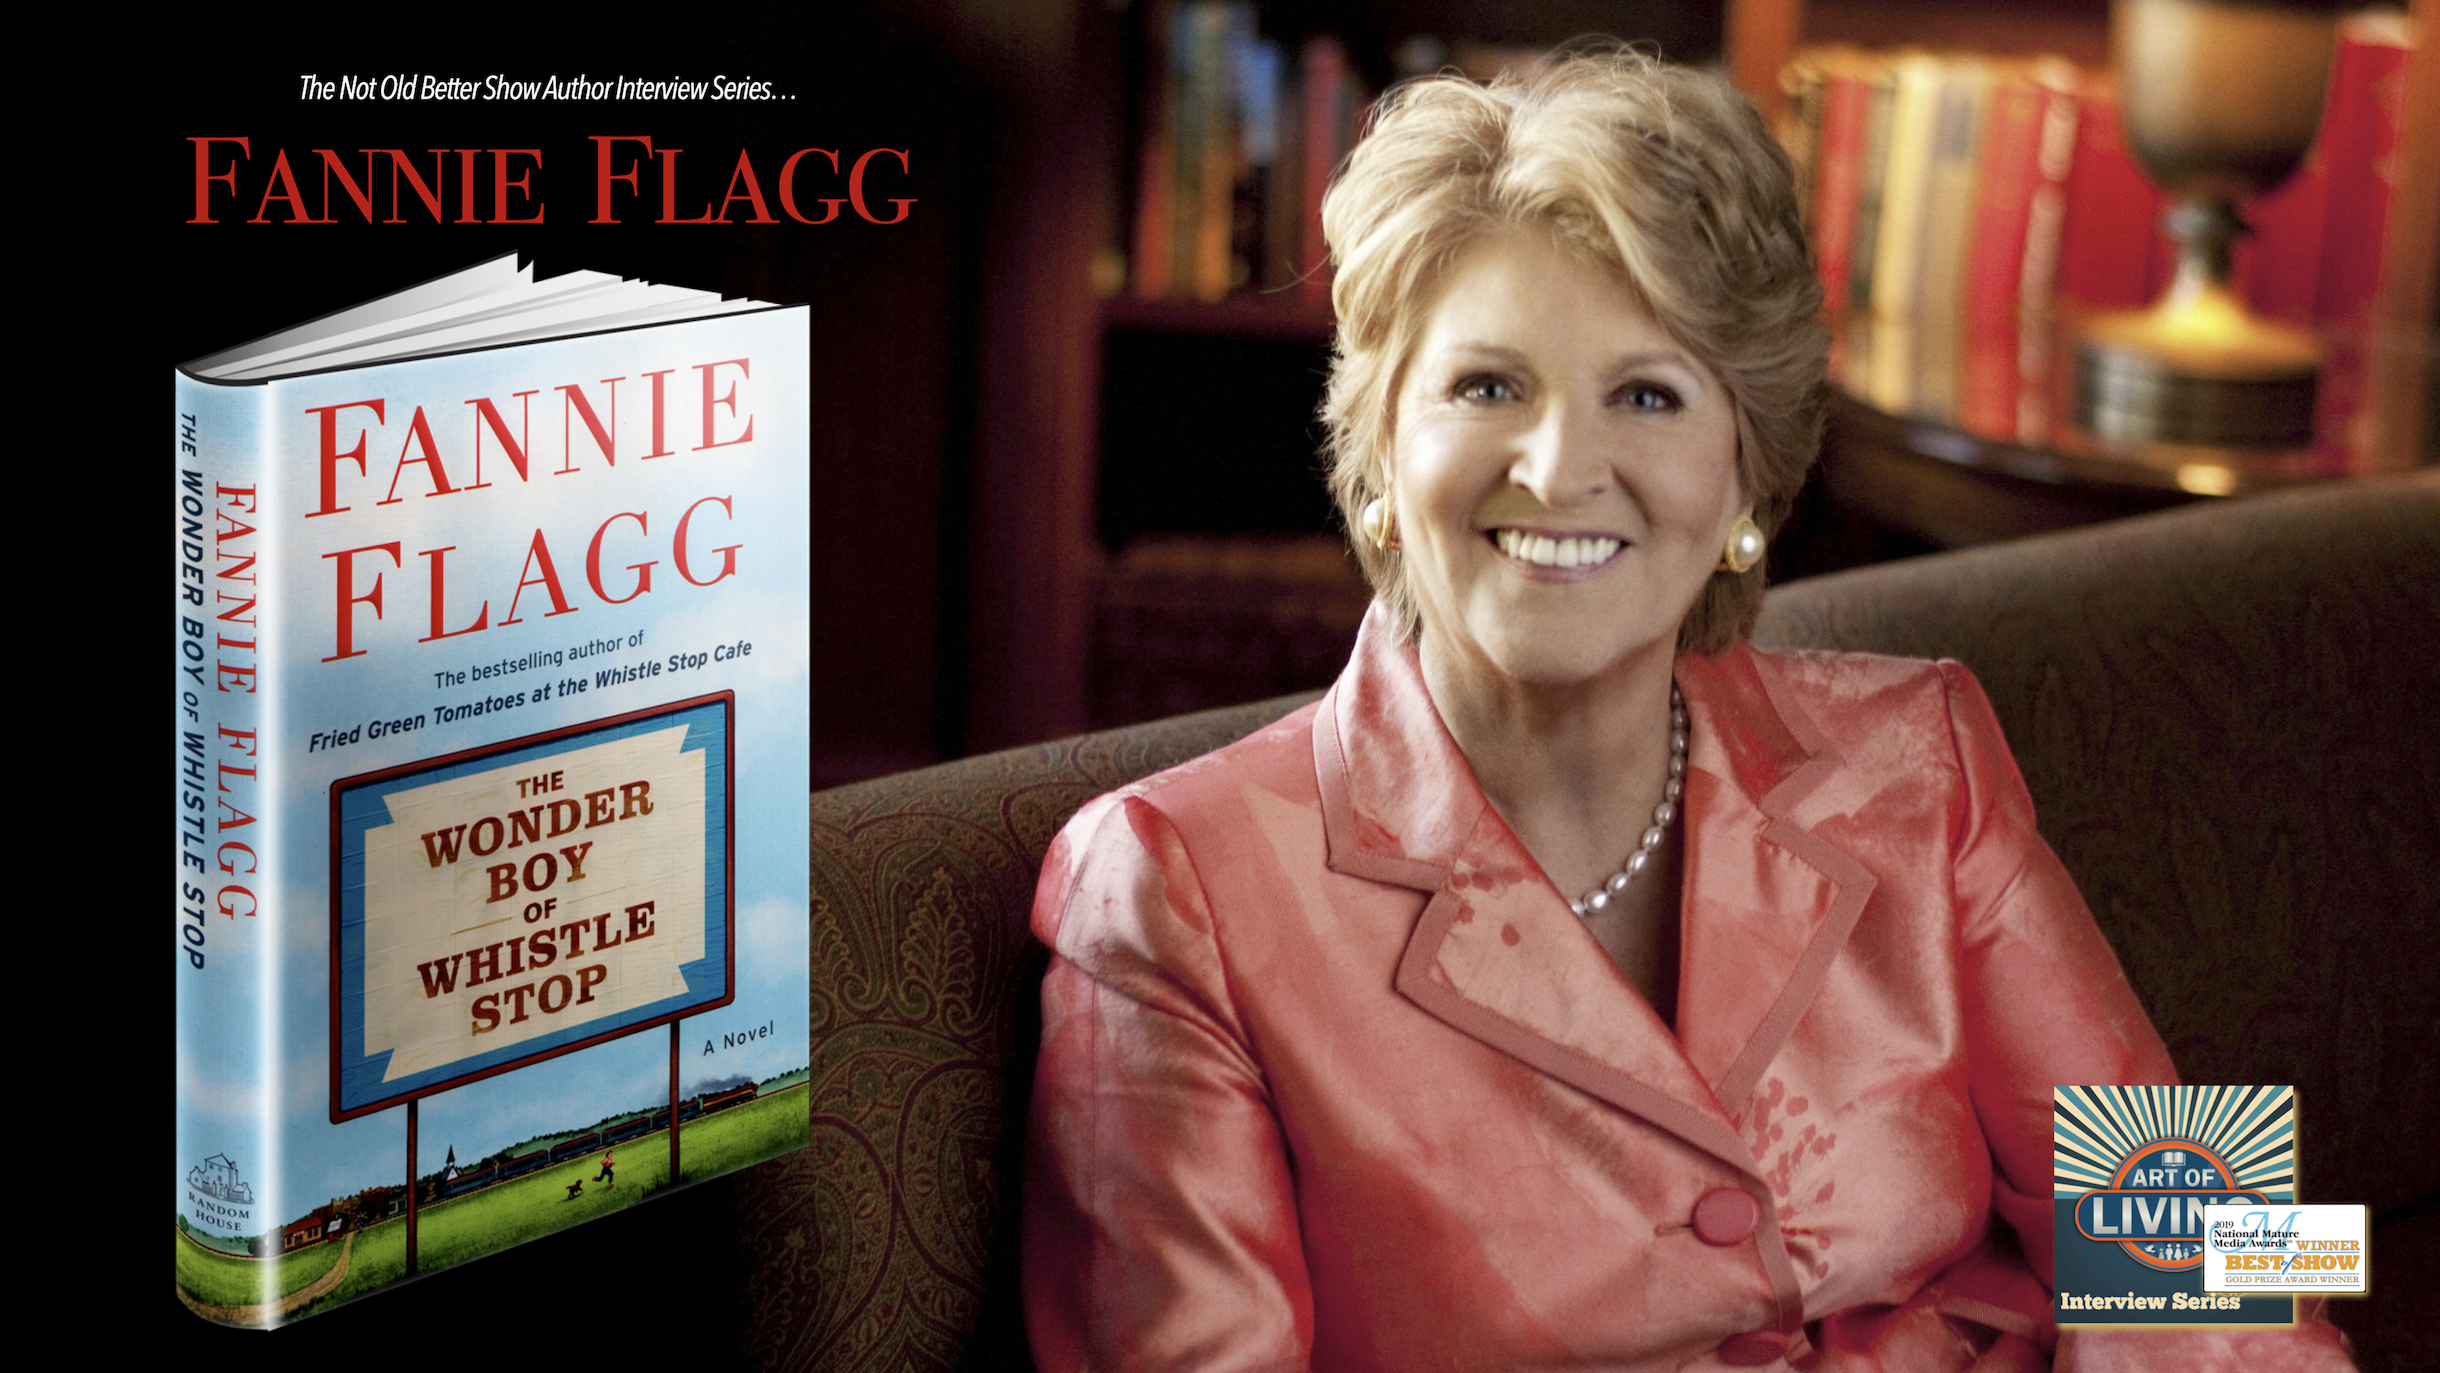 You all know Fannie Flagg, and know that her career started in the fifth gr...